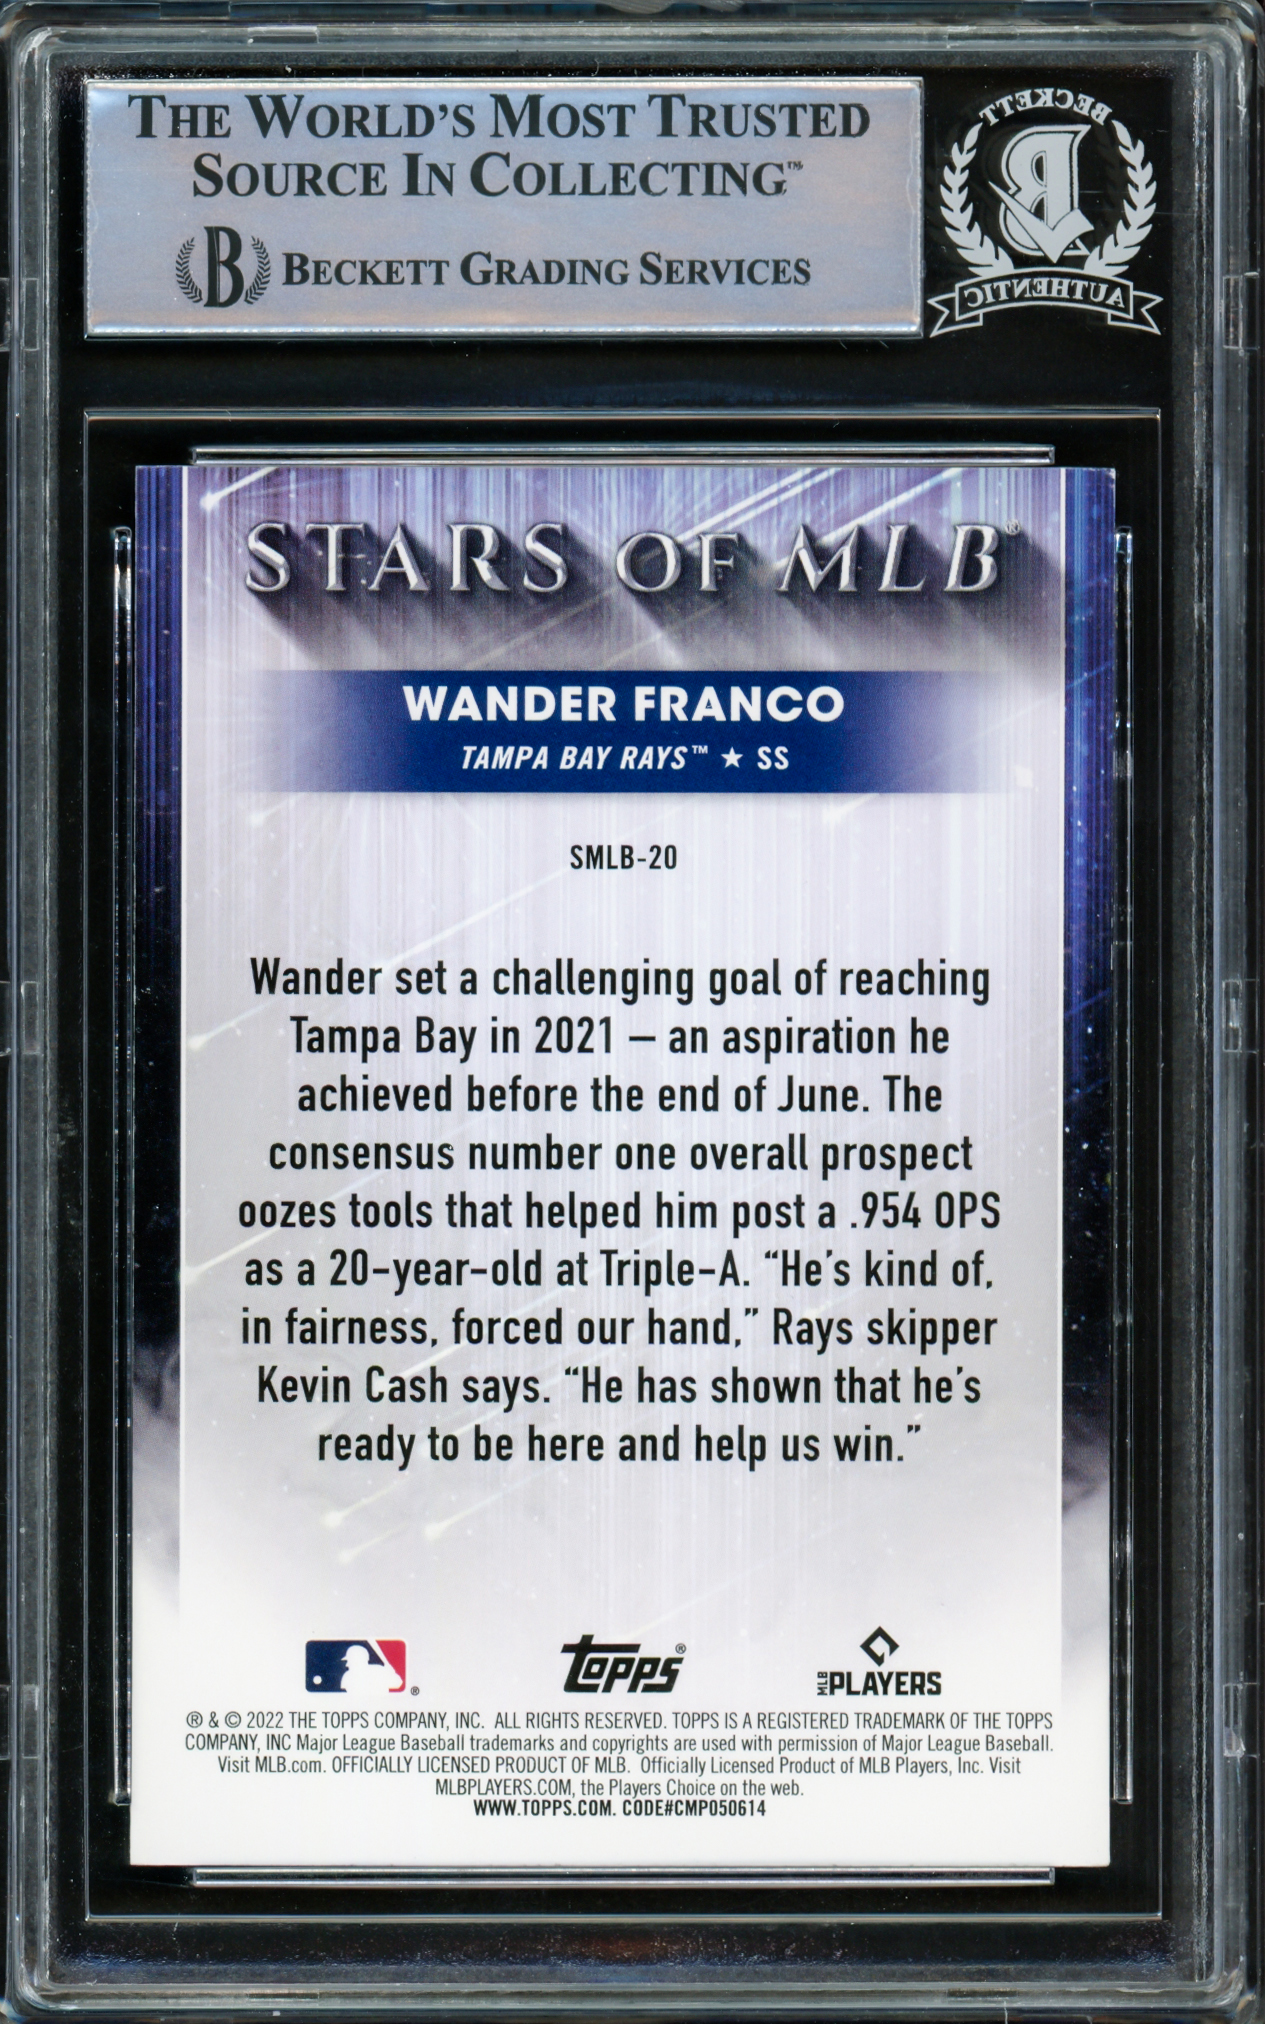 Tampa Bay Rays: Wander Franco 2021 - Officially Licensed MLB